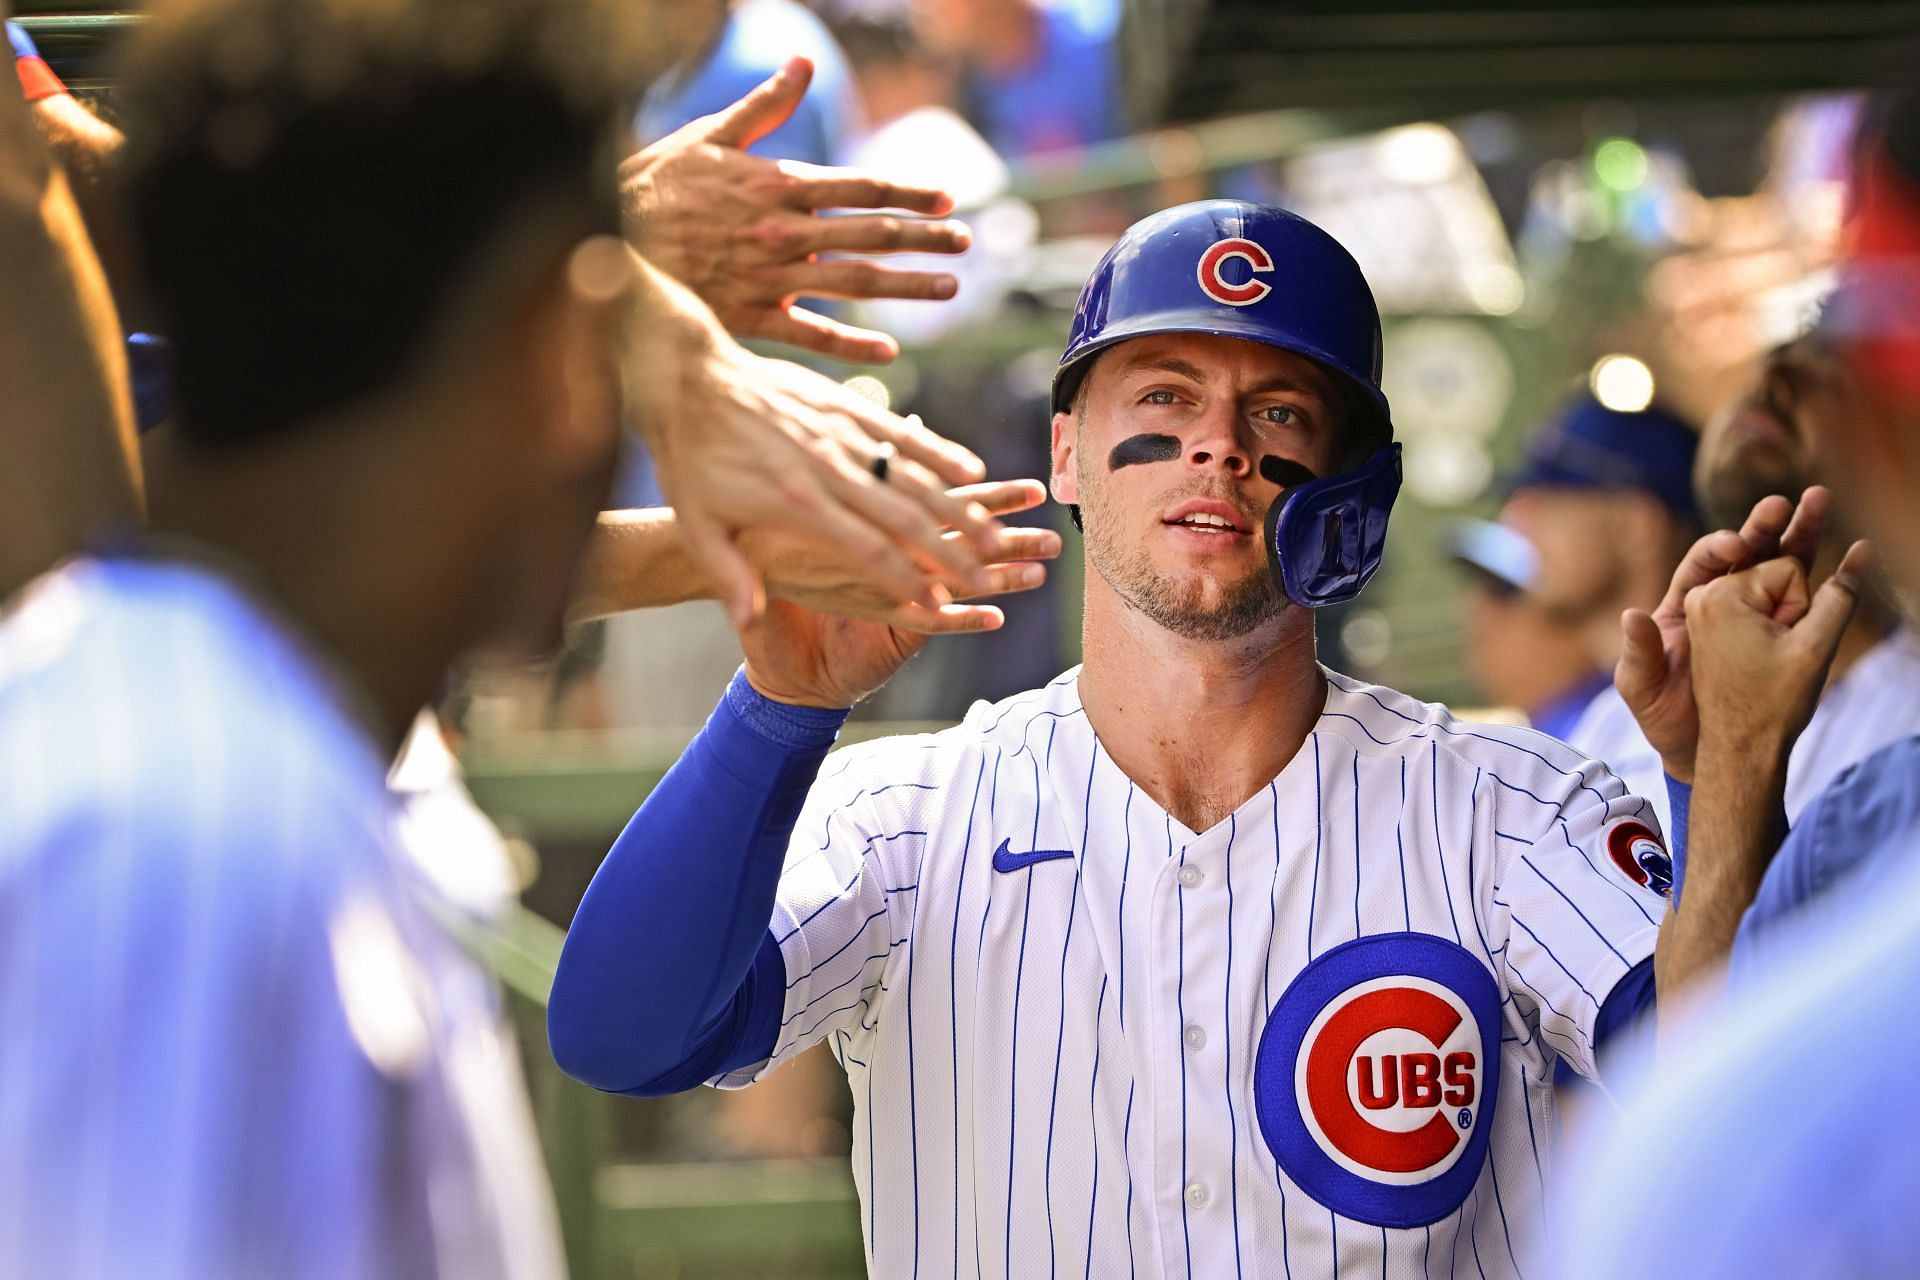 Chicago Cubs fans react to team reportedly signing slugger Nico